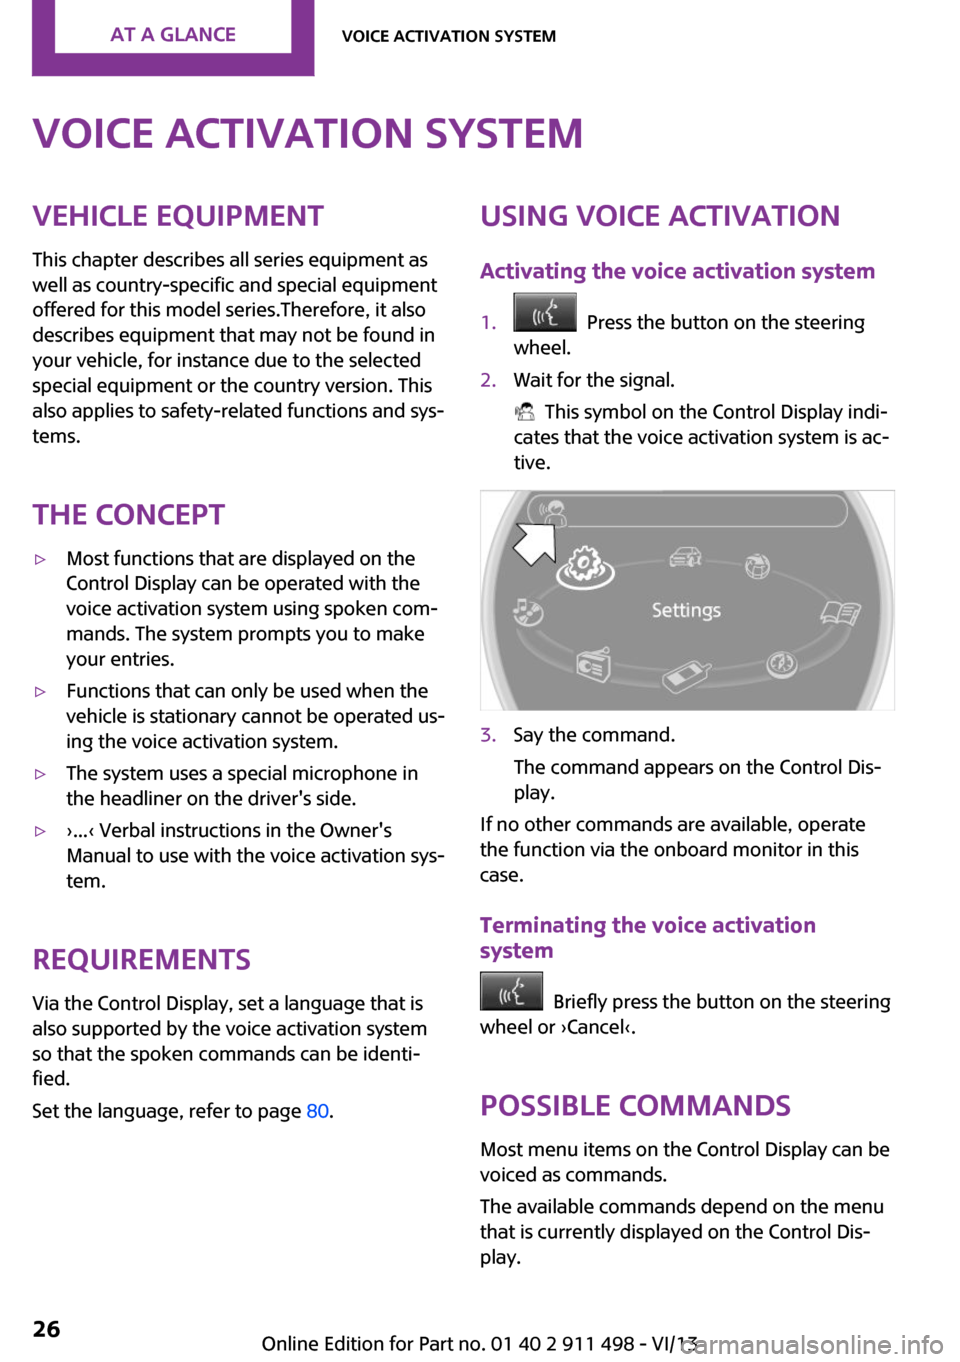 MINI Roadster 2014  Owners Manual (Mini Connected) Voice activation systemVehicle equipment
This chapter describes all series equipment as
well as country-specific and special equipment
offered for this model series.Therefore, it also
describes equipm